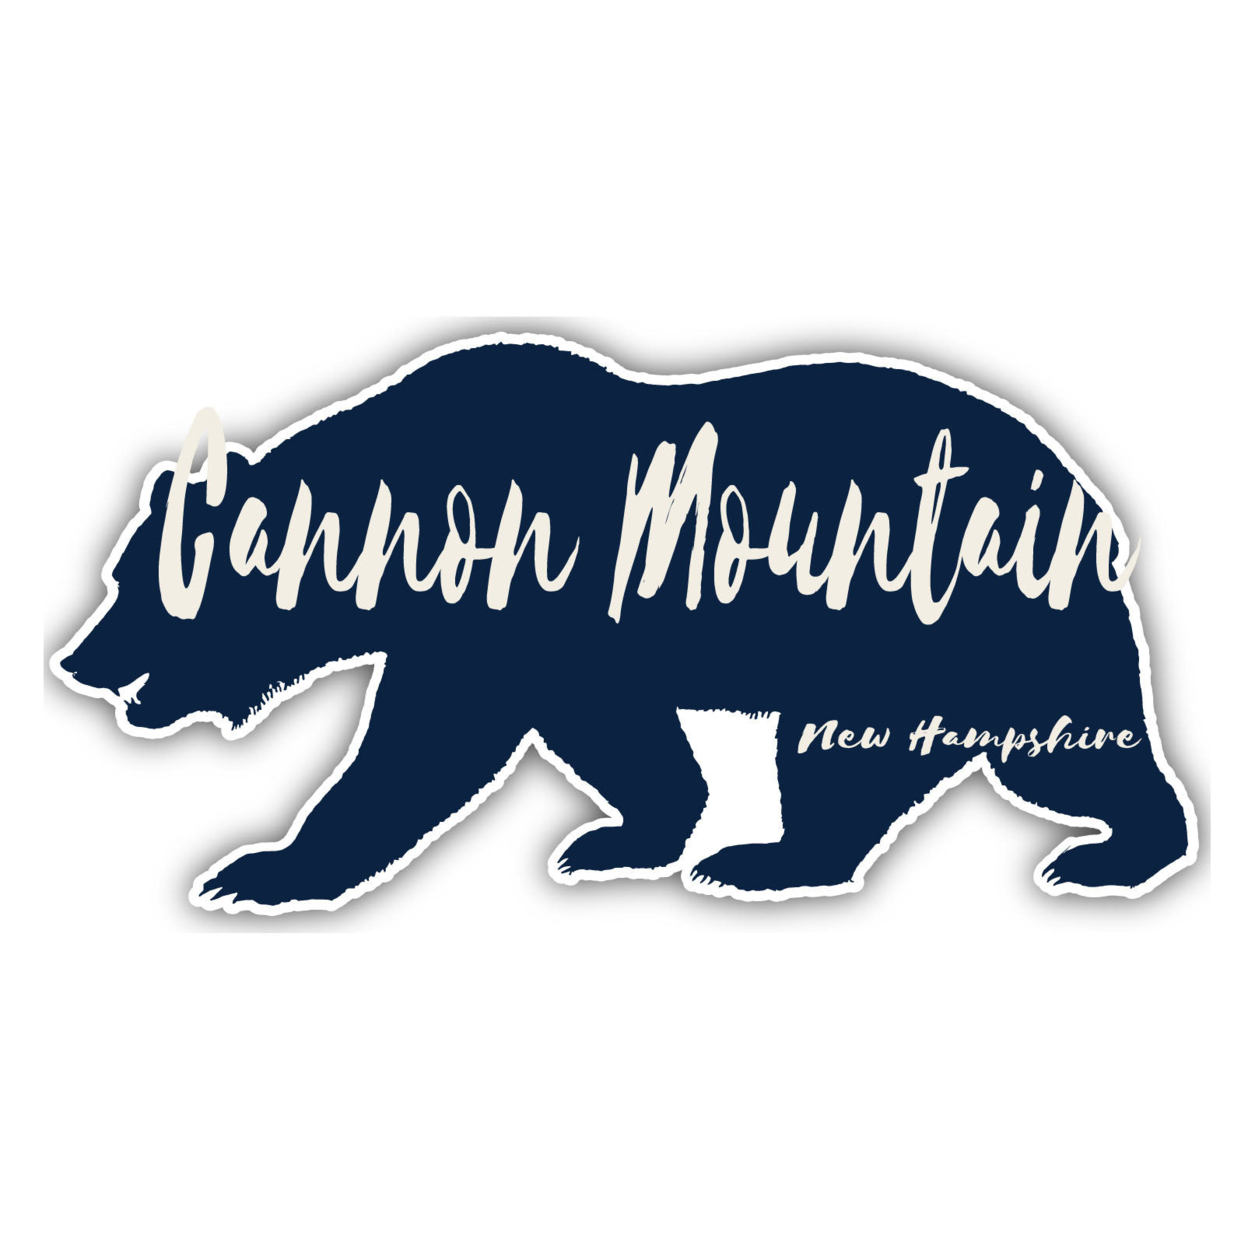 Cannon Mountain New Hampshire Souvenir Decorative Stickers (Choose Theme And Size) - 4-Pack, 6-Inch, Bear